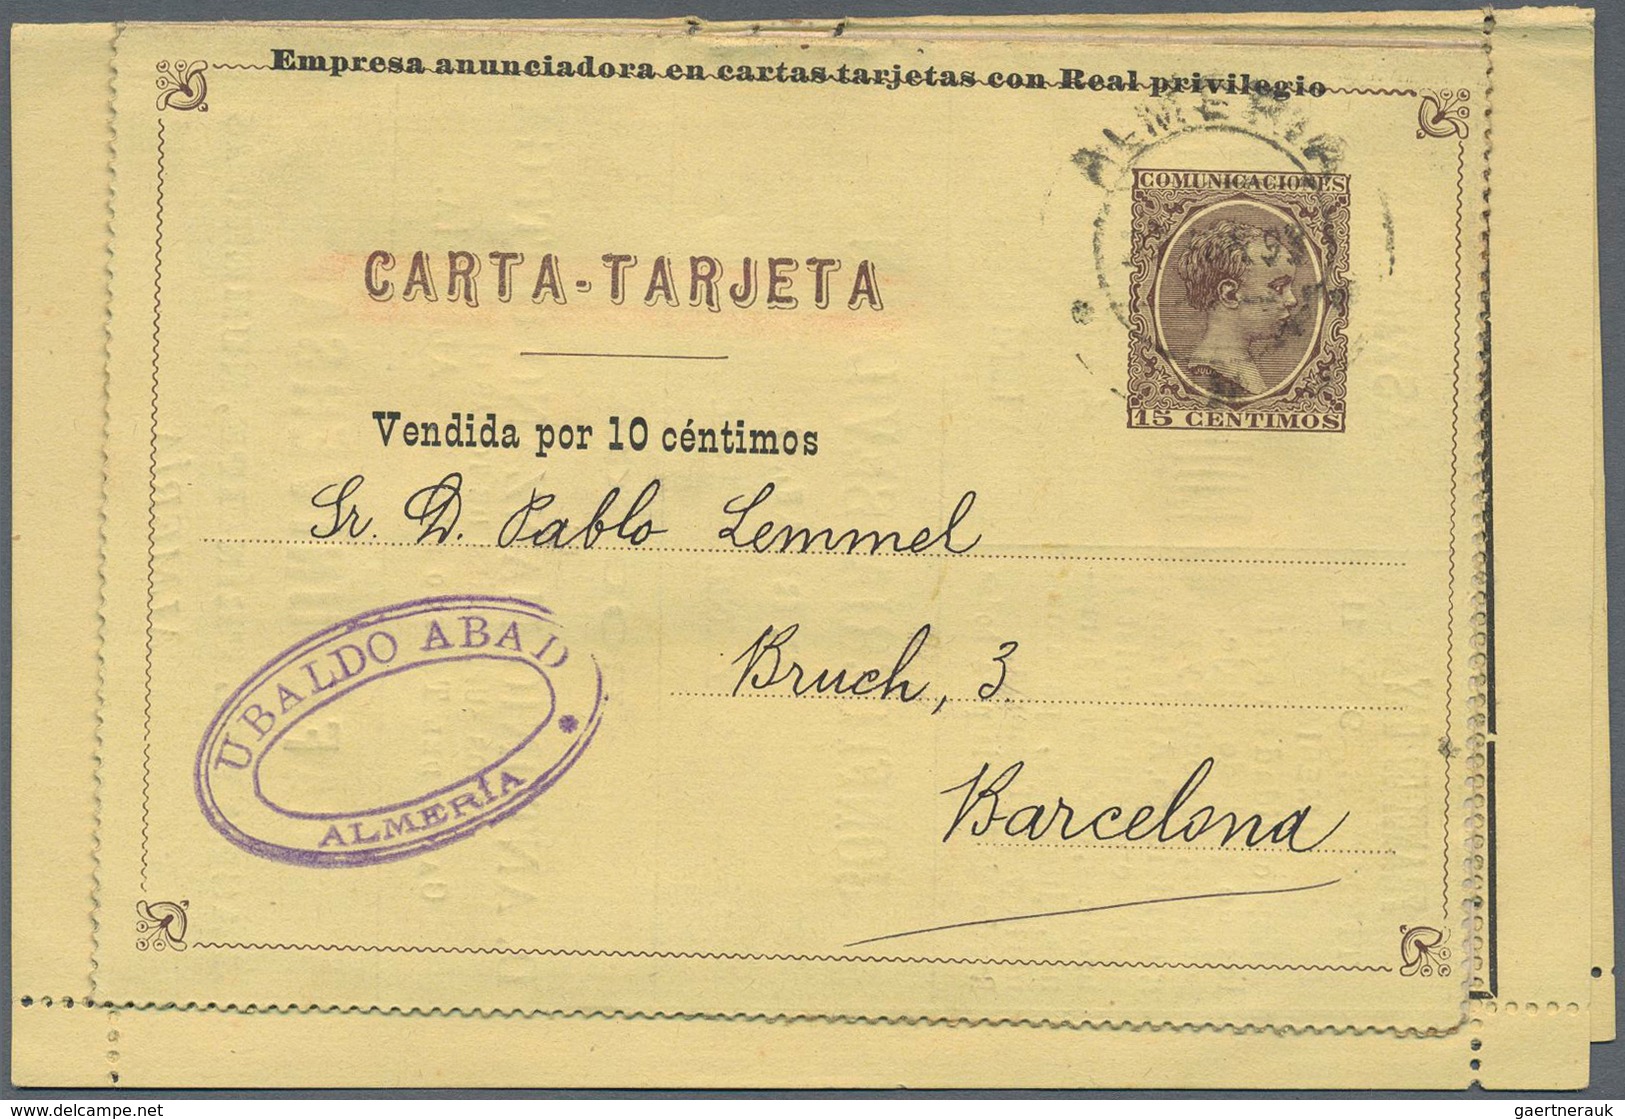 Spanien - Ganzsachen: 1893. Ad Letter Card 15c Alfonso XIII. Pelón With Some Almeria Ads Inside. Use - 1850-1931